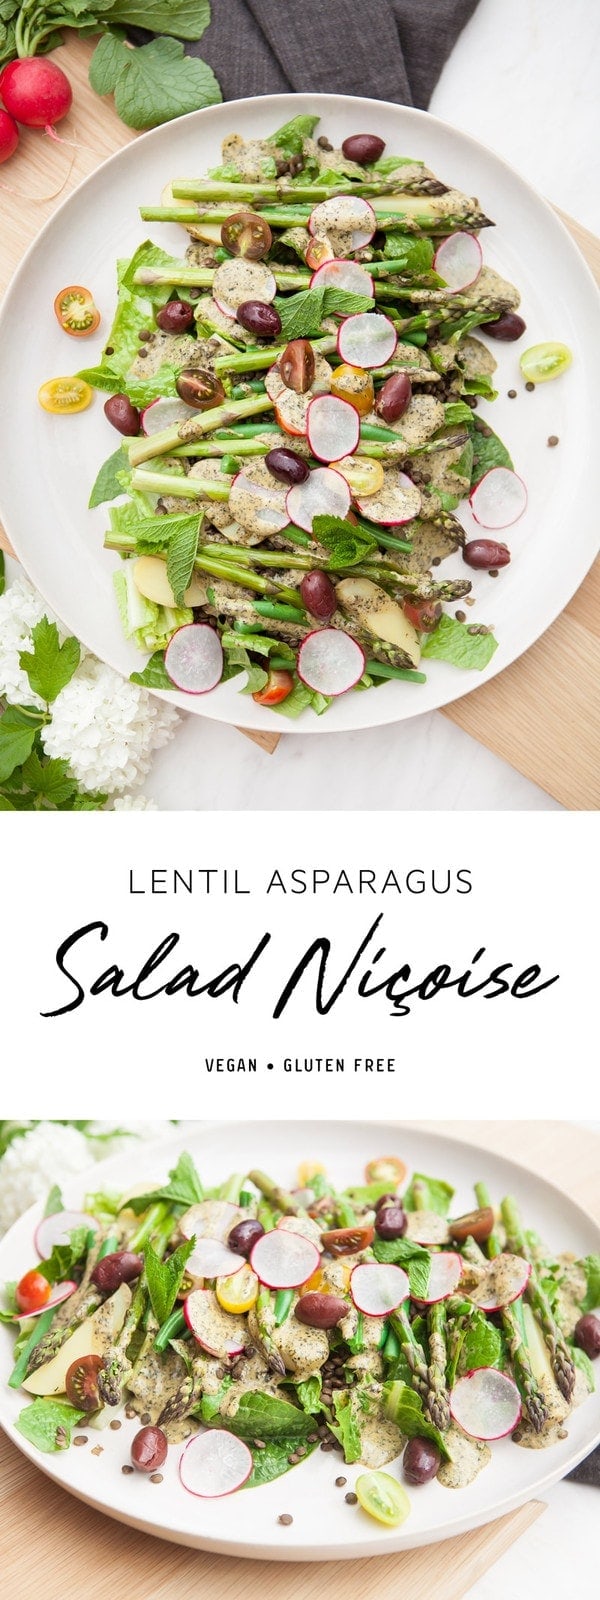 This vegan Lentil and Asparagus Nicoise Salad recipe is packed full of nutrients. Made without egg or tuna, it has a creamy mustard dressing infused with capers, seaweed and black salt. The perfect summer picnic recipe. #summersalads #summersaladideas #vegansaladideas #veganpicnicideas #summersaladrecipes #vegannicoise #lentilnicoise #nicoisesalad #glutenfreesaladideas #veganpicnicrecipes #picnicrecipes #picnicideas #nicoisesaladdressing #nicoisesaladdresingvegan #vegansaladdressing #AscensionKitchen // Pin to your own inspiration board! // 